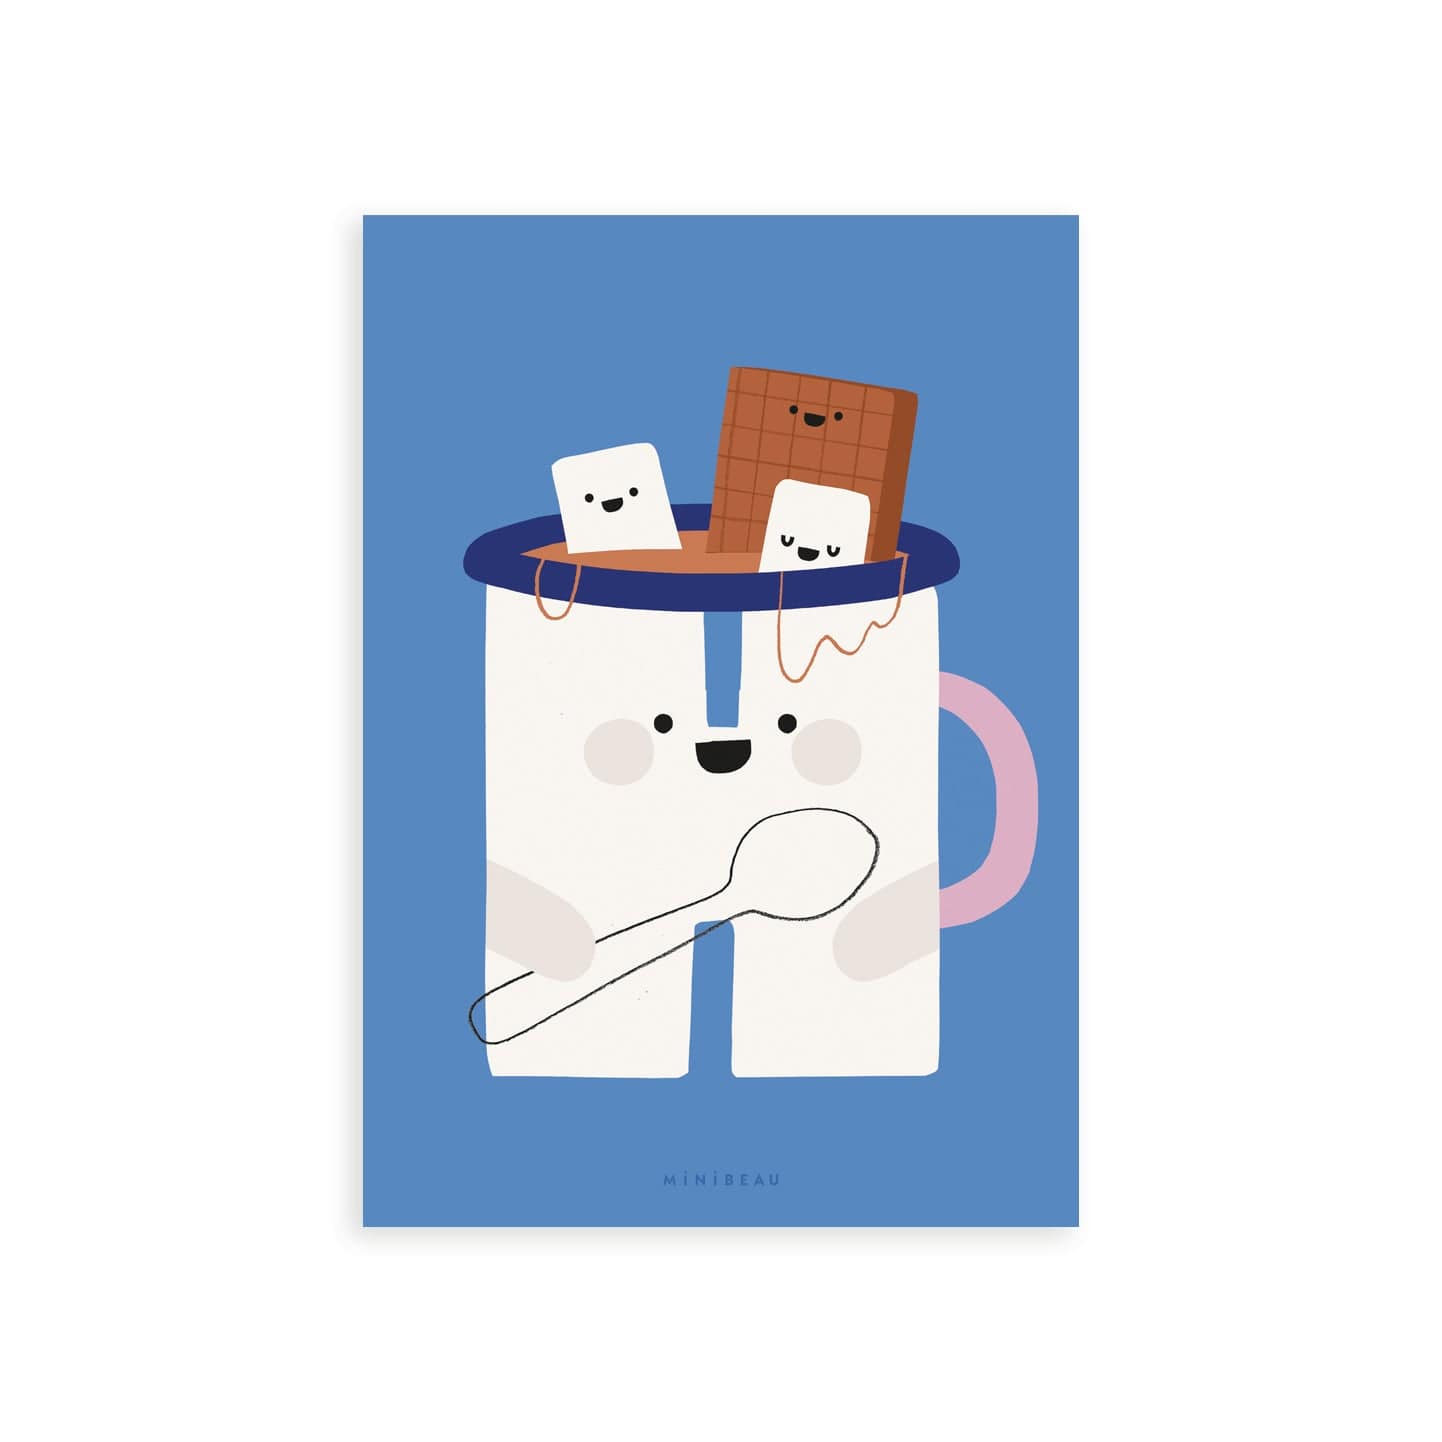 Our Happy Alphabet 'H' Art Print shows a smiling pink handled, white mug of hot chocolate, holding a spoon, with smiling marshmallows and chocolate bar sitting in the hot chocolate, on a blue background.